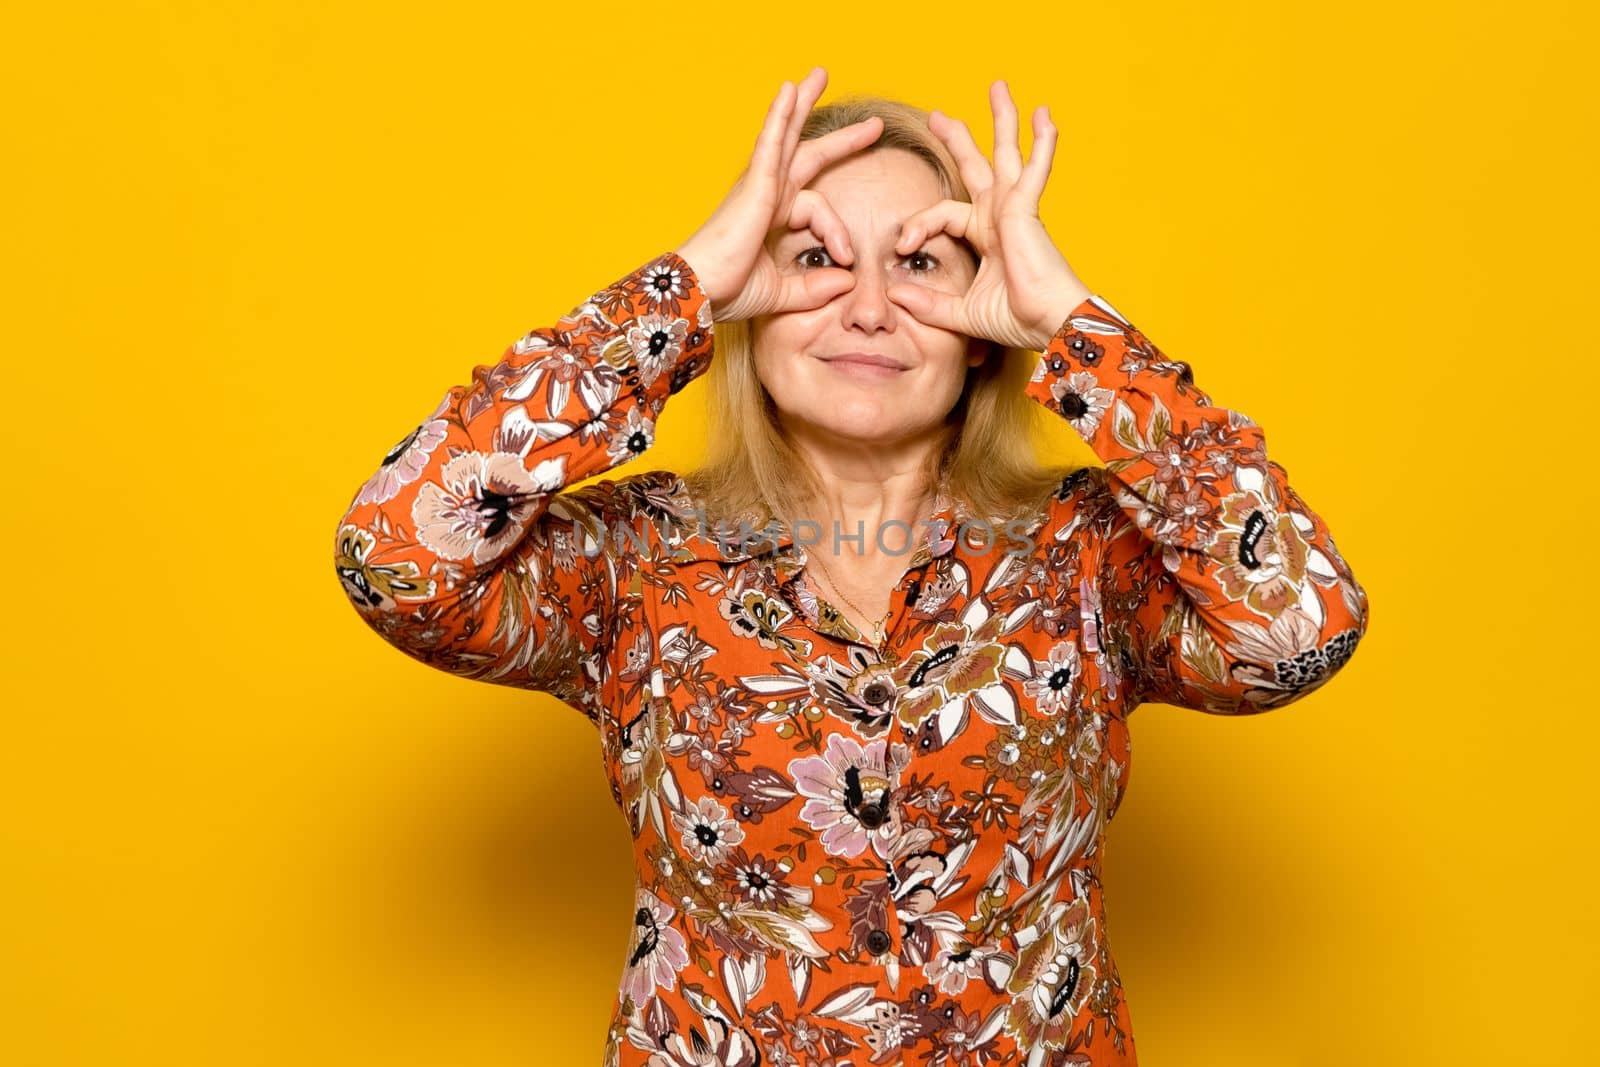 Portrait of astonished caucasian blonde woman spying, seeing amazing shocking event, looking through fingers imitating binoculars, wearing patterned dress. Isolated on yellow background by Barriolo82